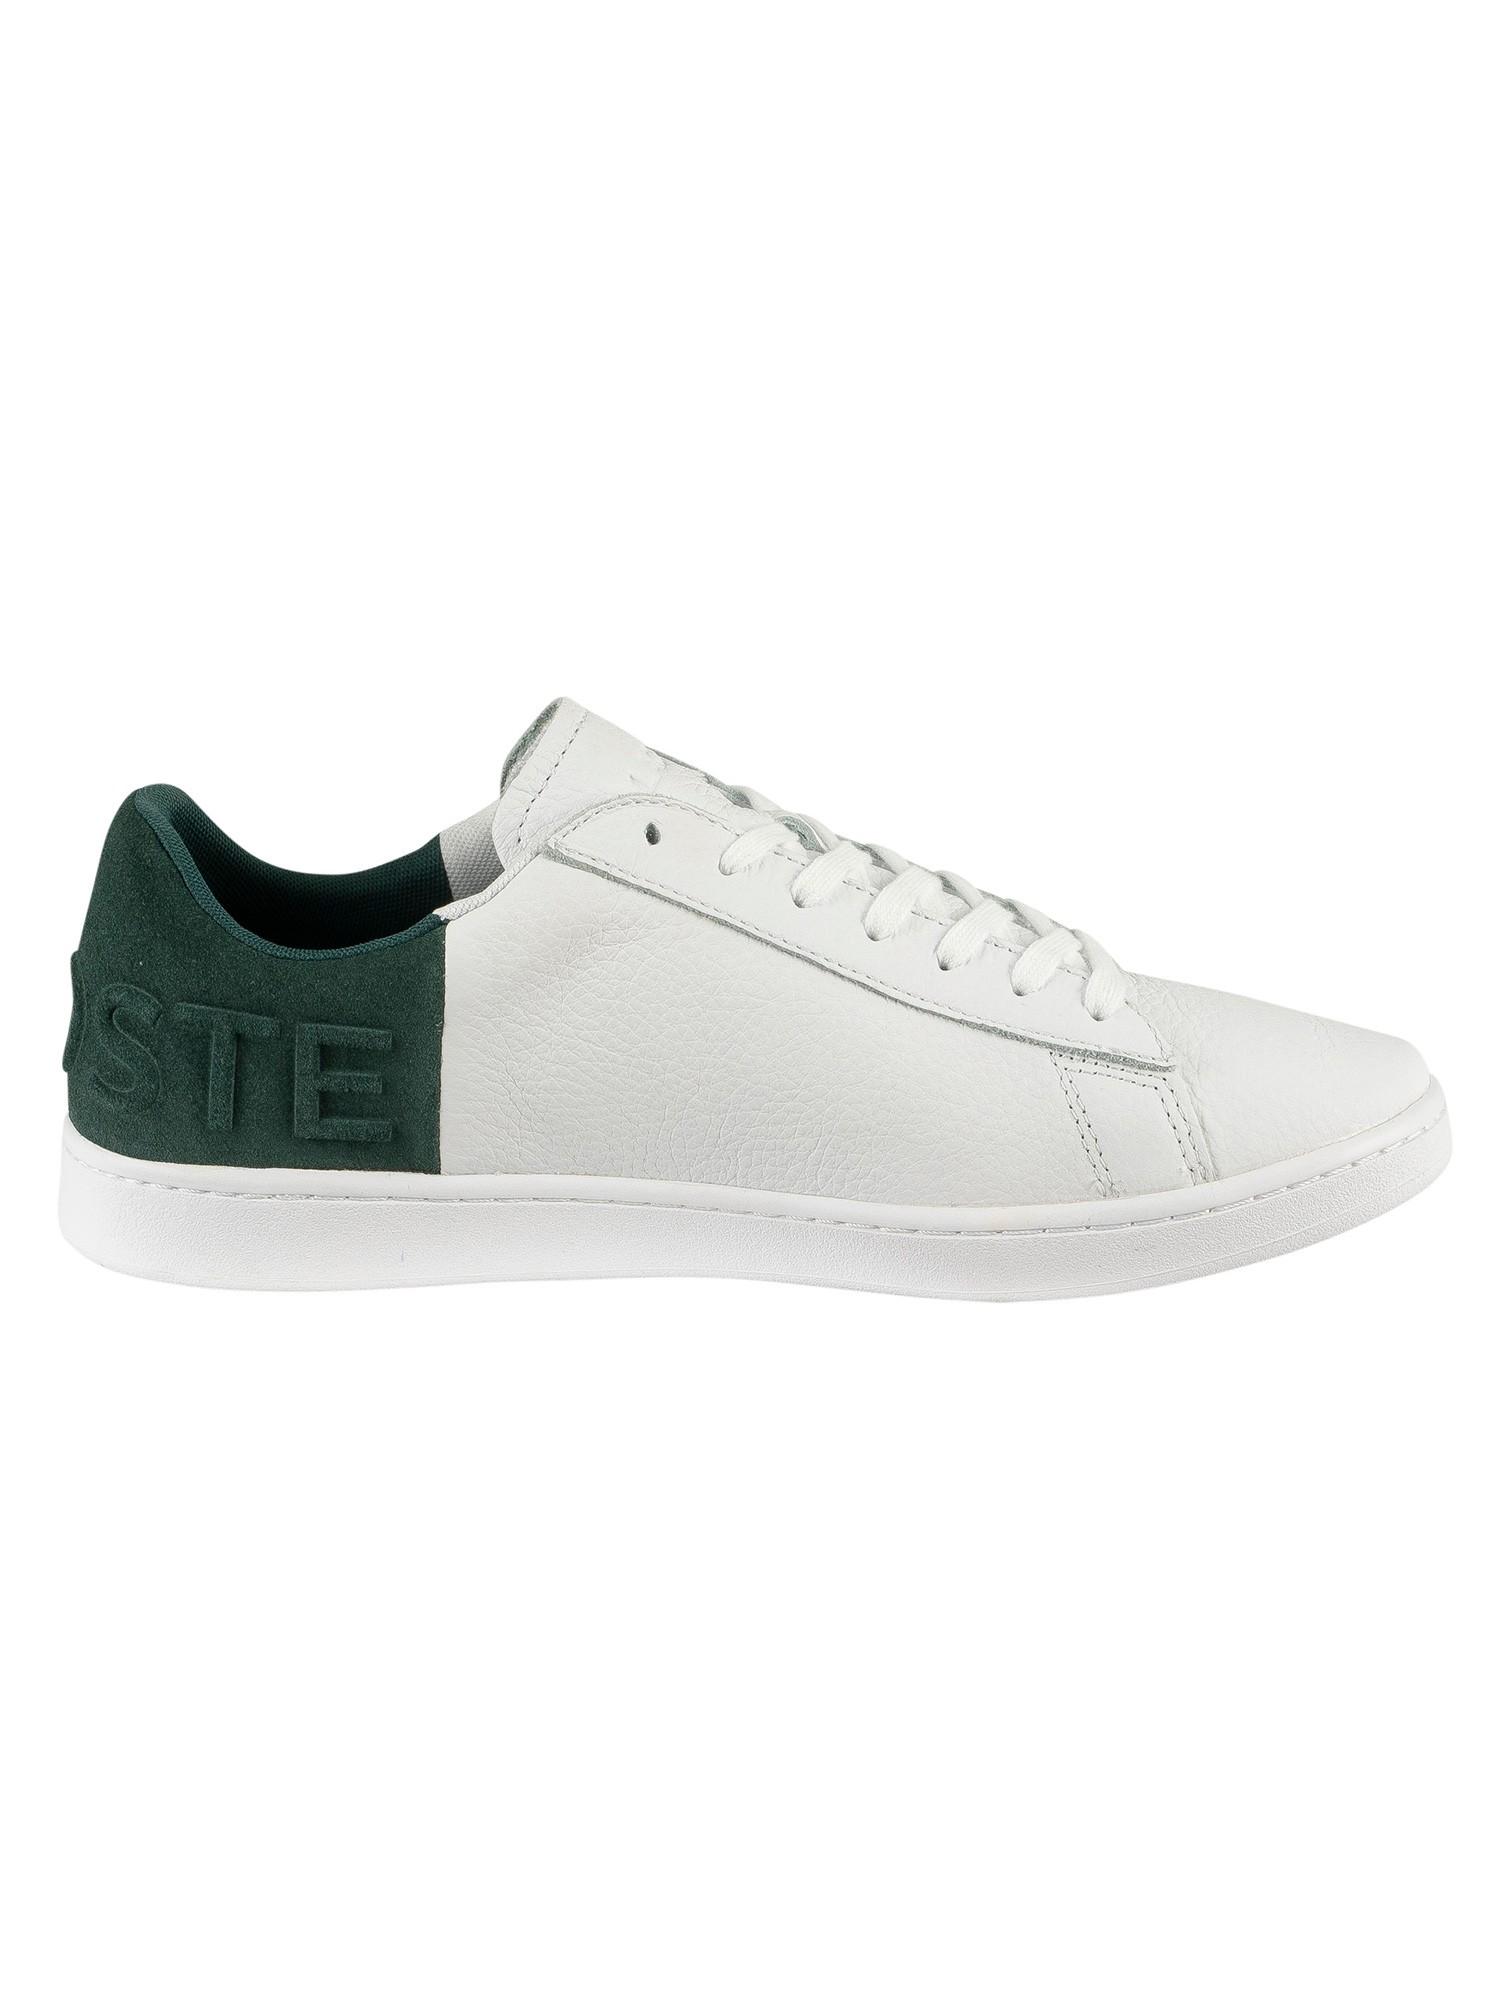 Lacoste Carnaby Evo 419 2 Sma Leather Trainers in White/Dark Green (White)  for Men | Lyst